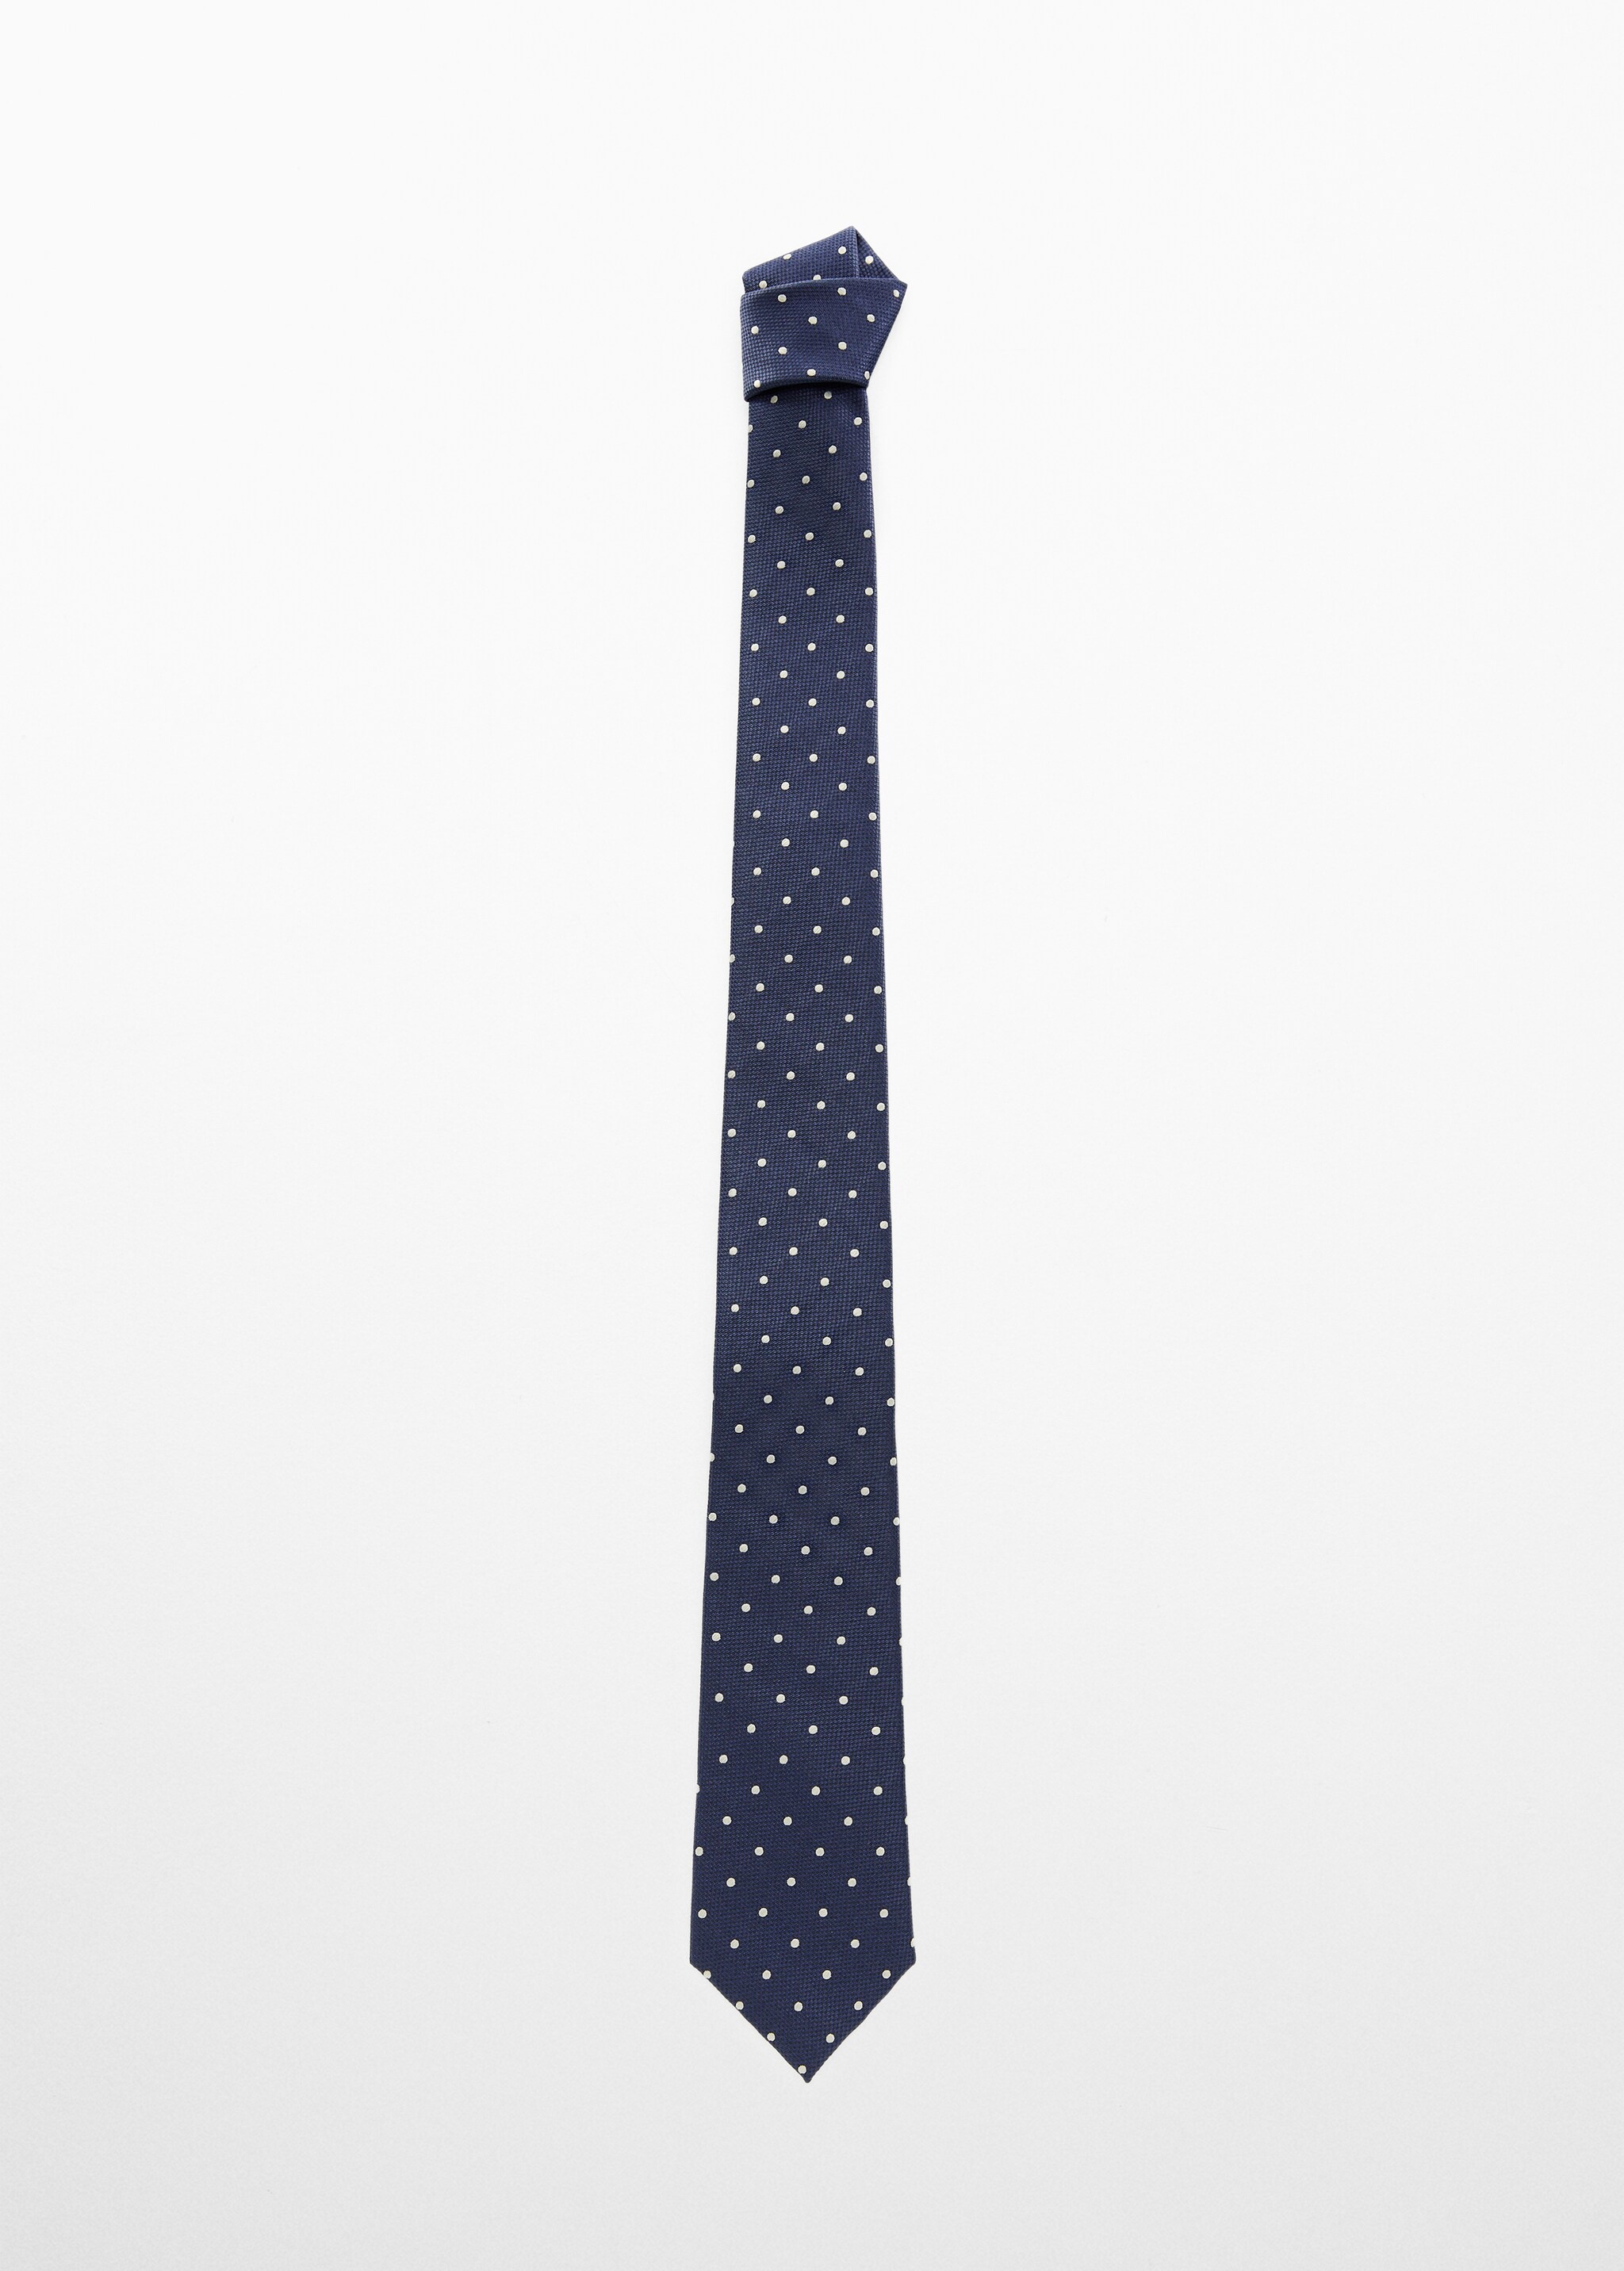 Polka-dot tie - Article without model